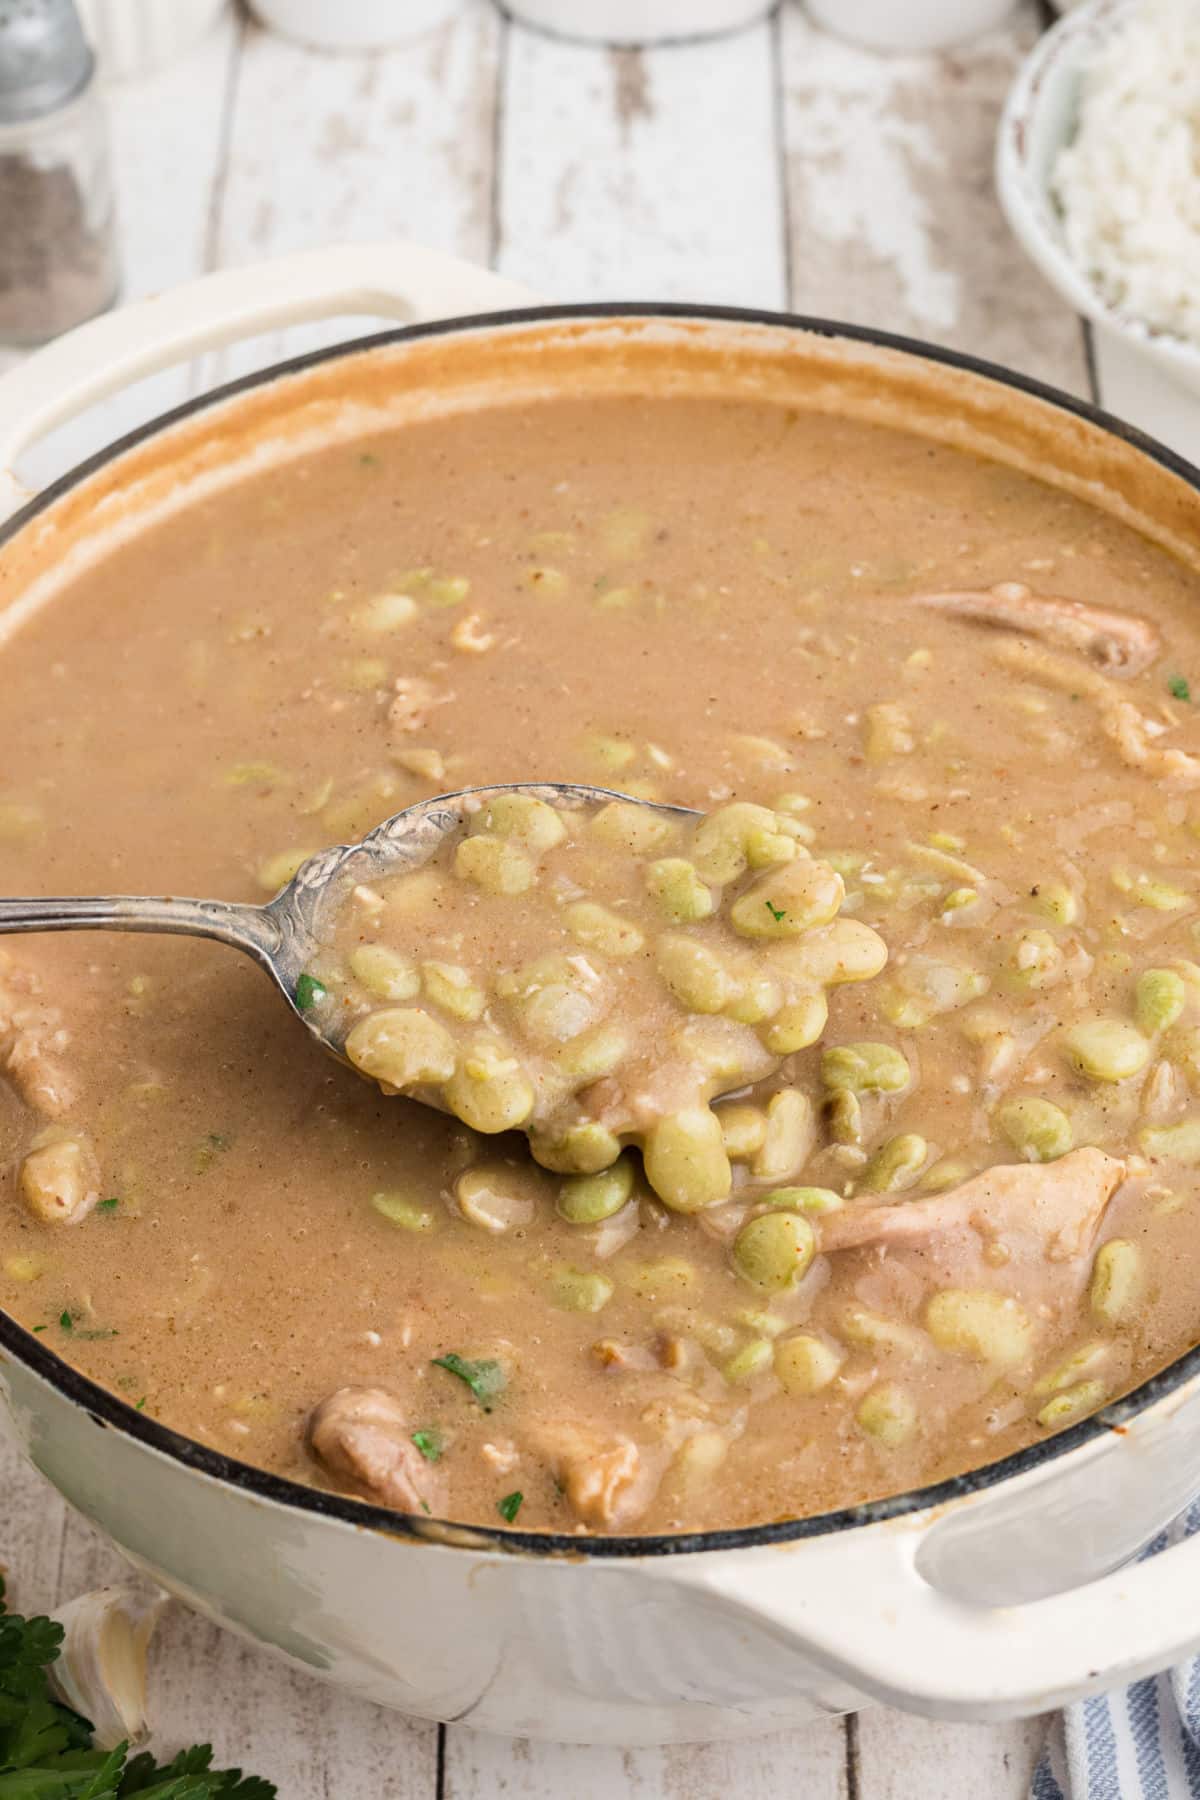 A spoon digging into a pot of chicken and lima beans.